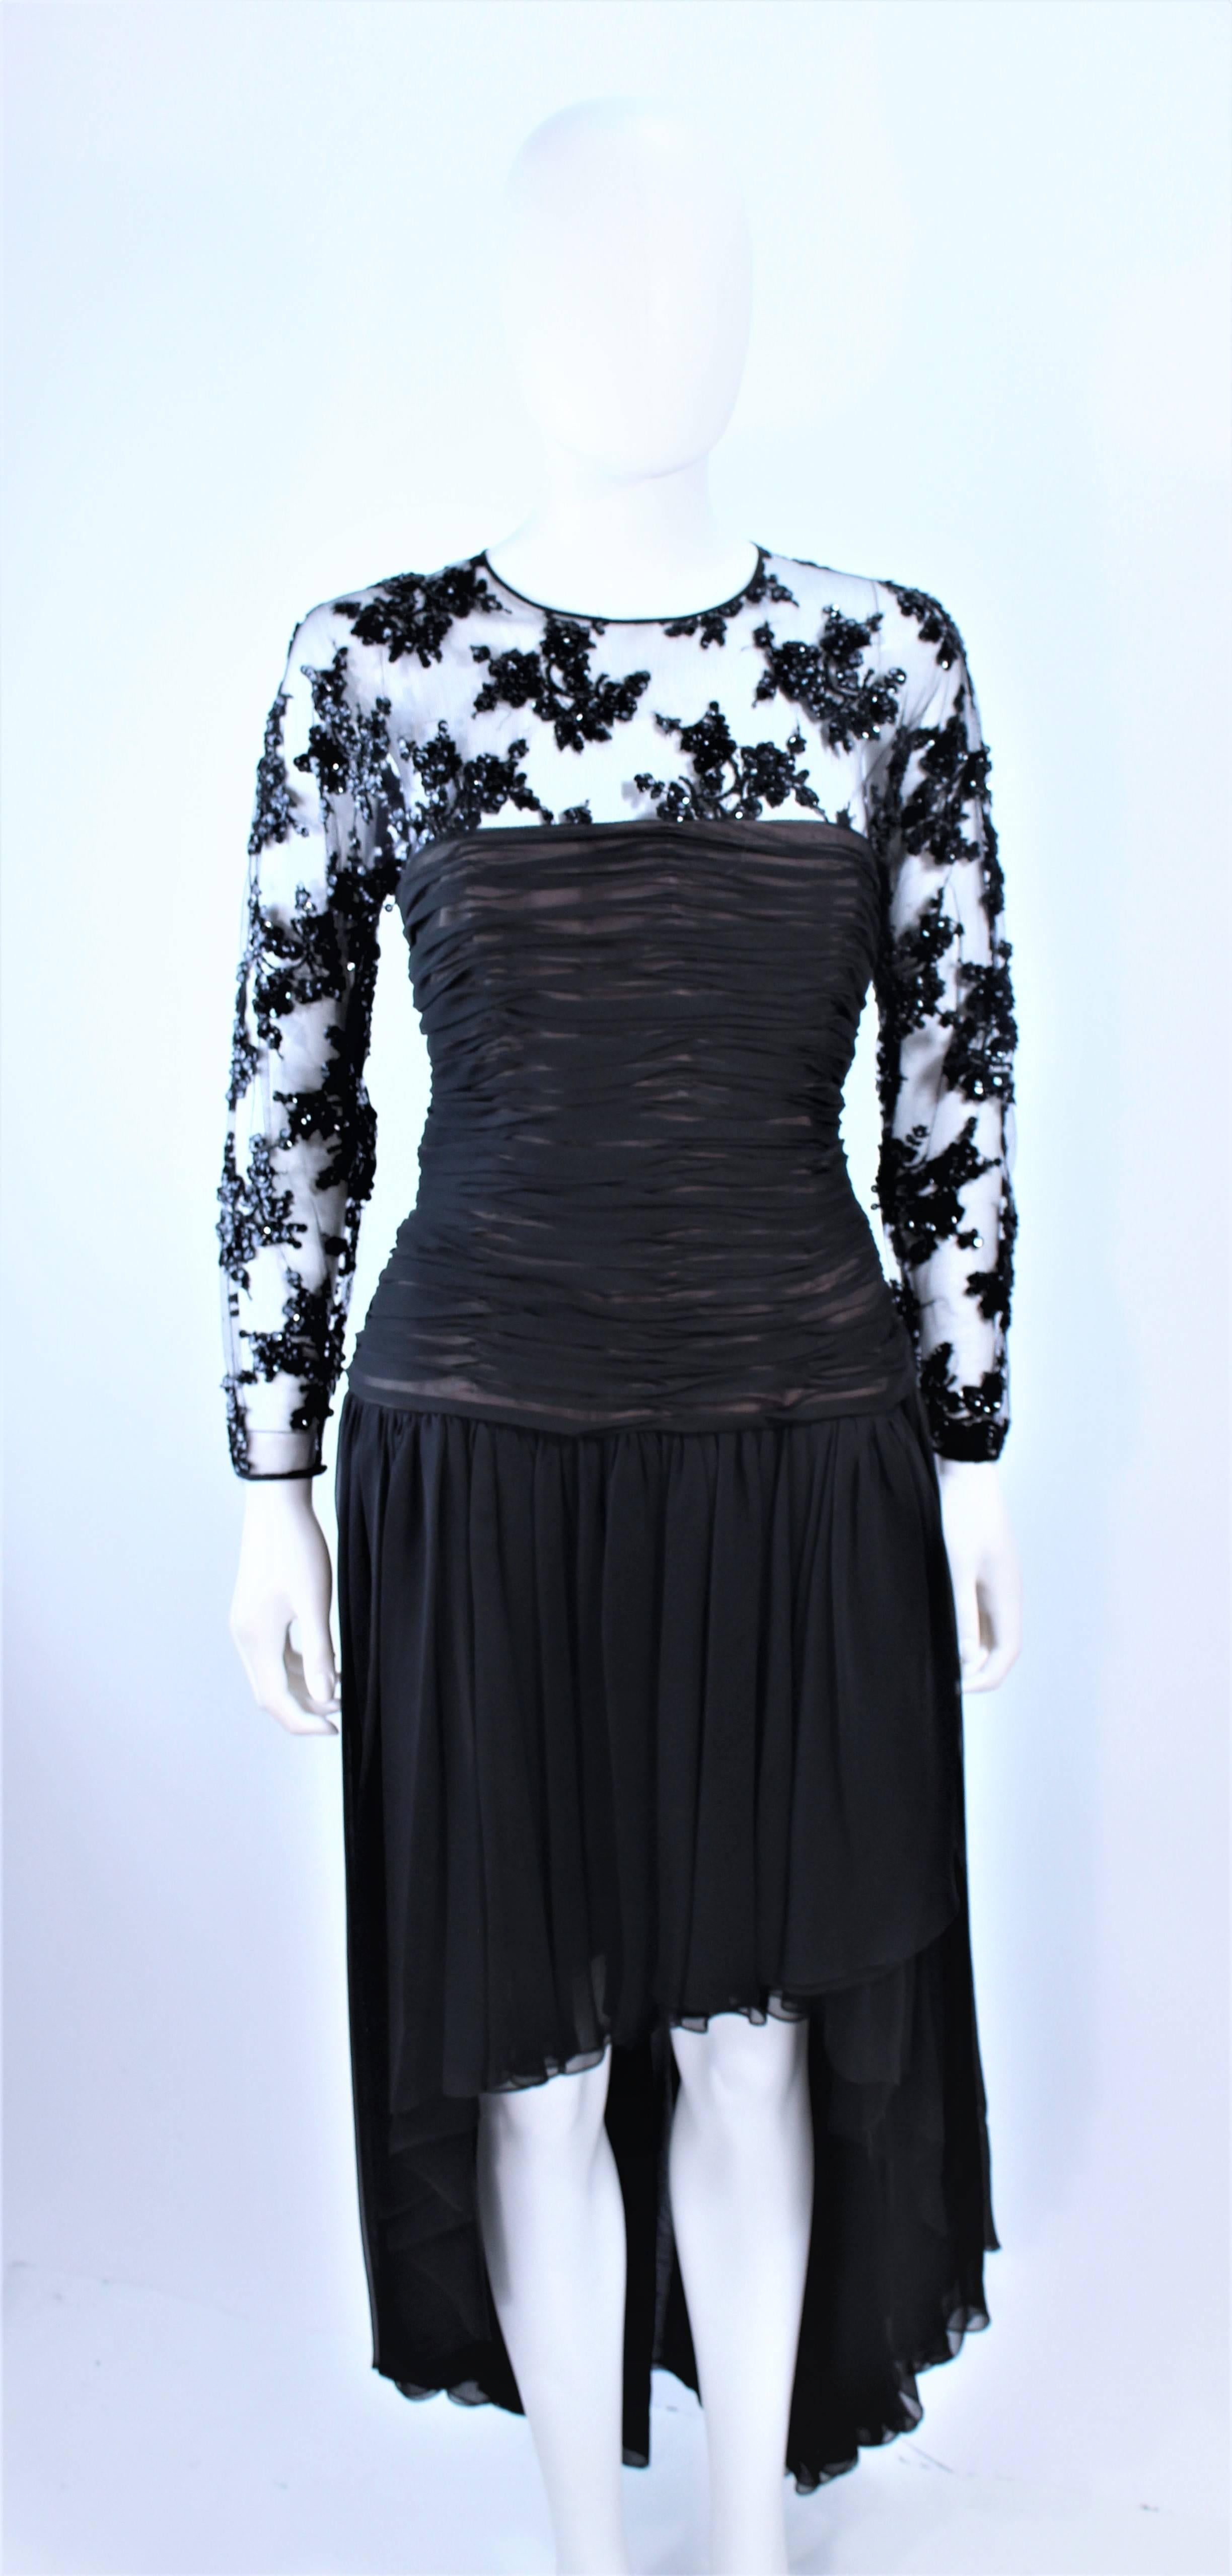 This Oscar De La Renta design is composed of a black chiffon with lace. Features a hi-low skirt with a ruched bodice, and a center back zipper closure. In excellent vintage condition.

**Please cross-reference measurements for personal accuracy.